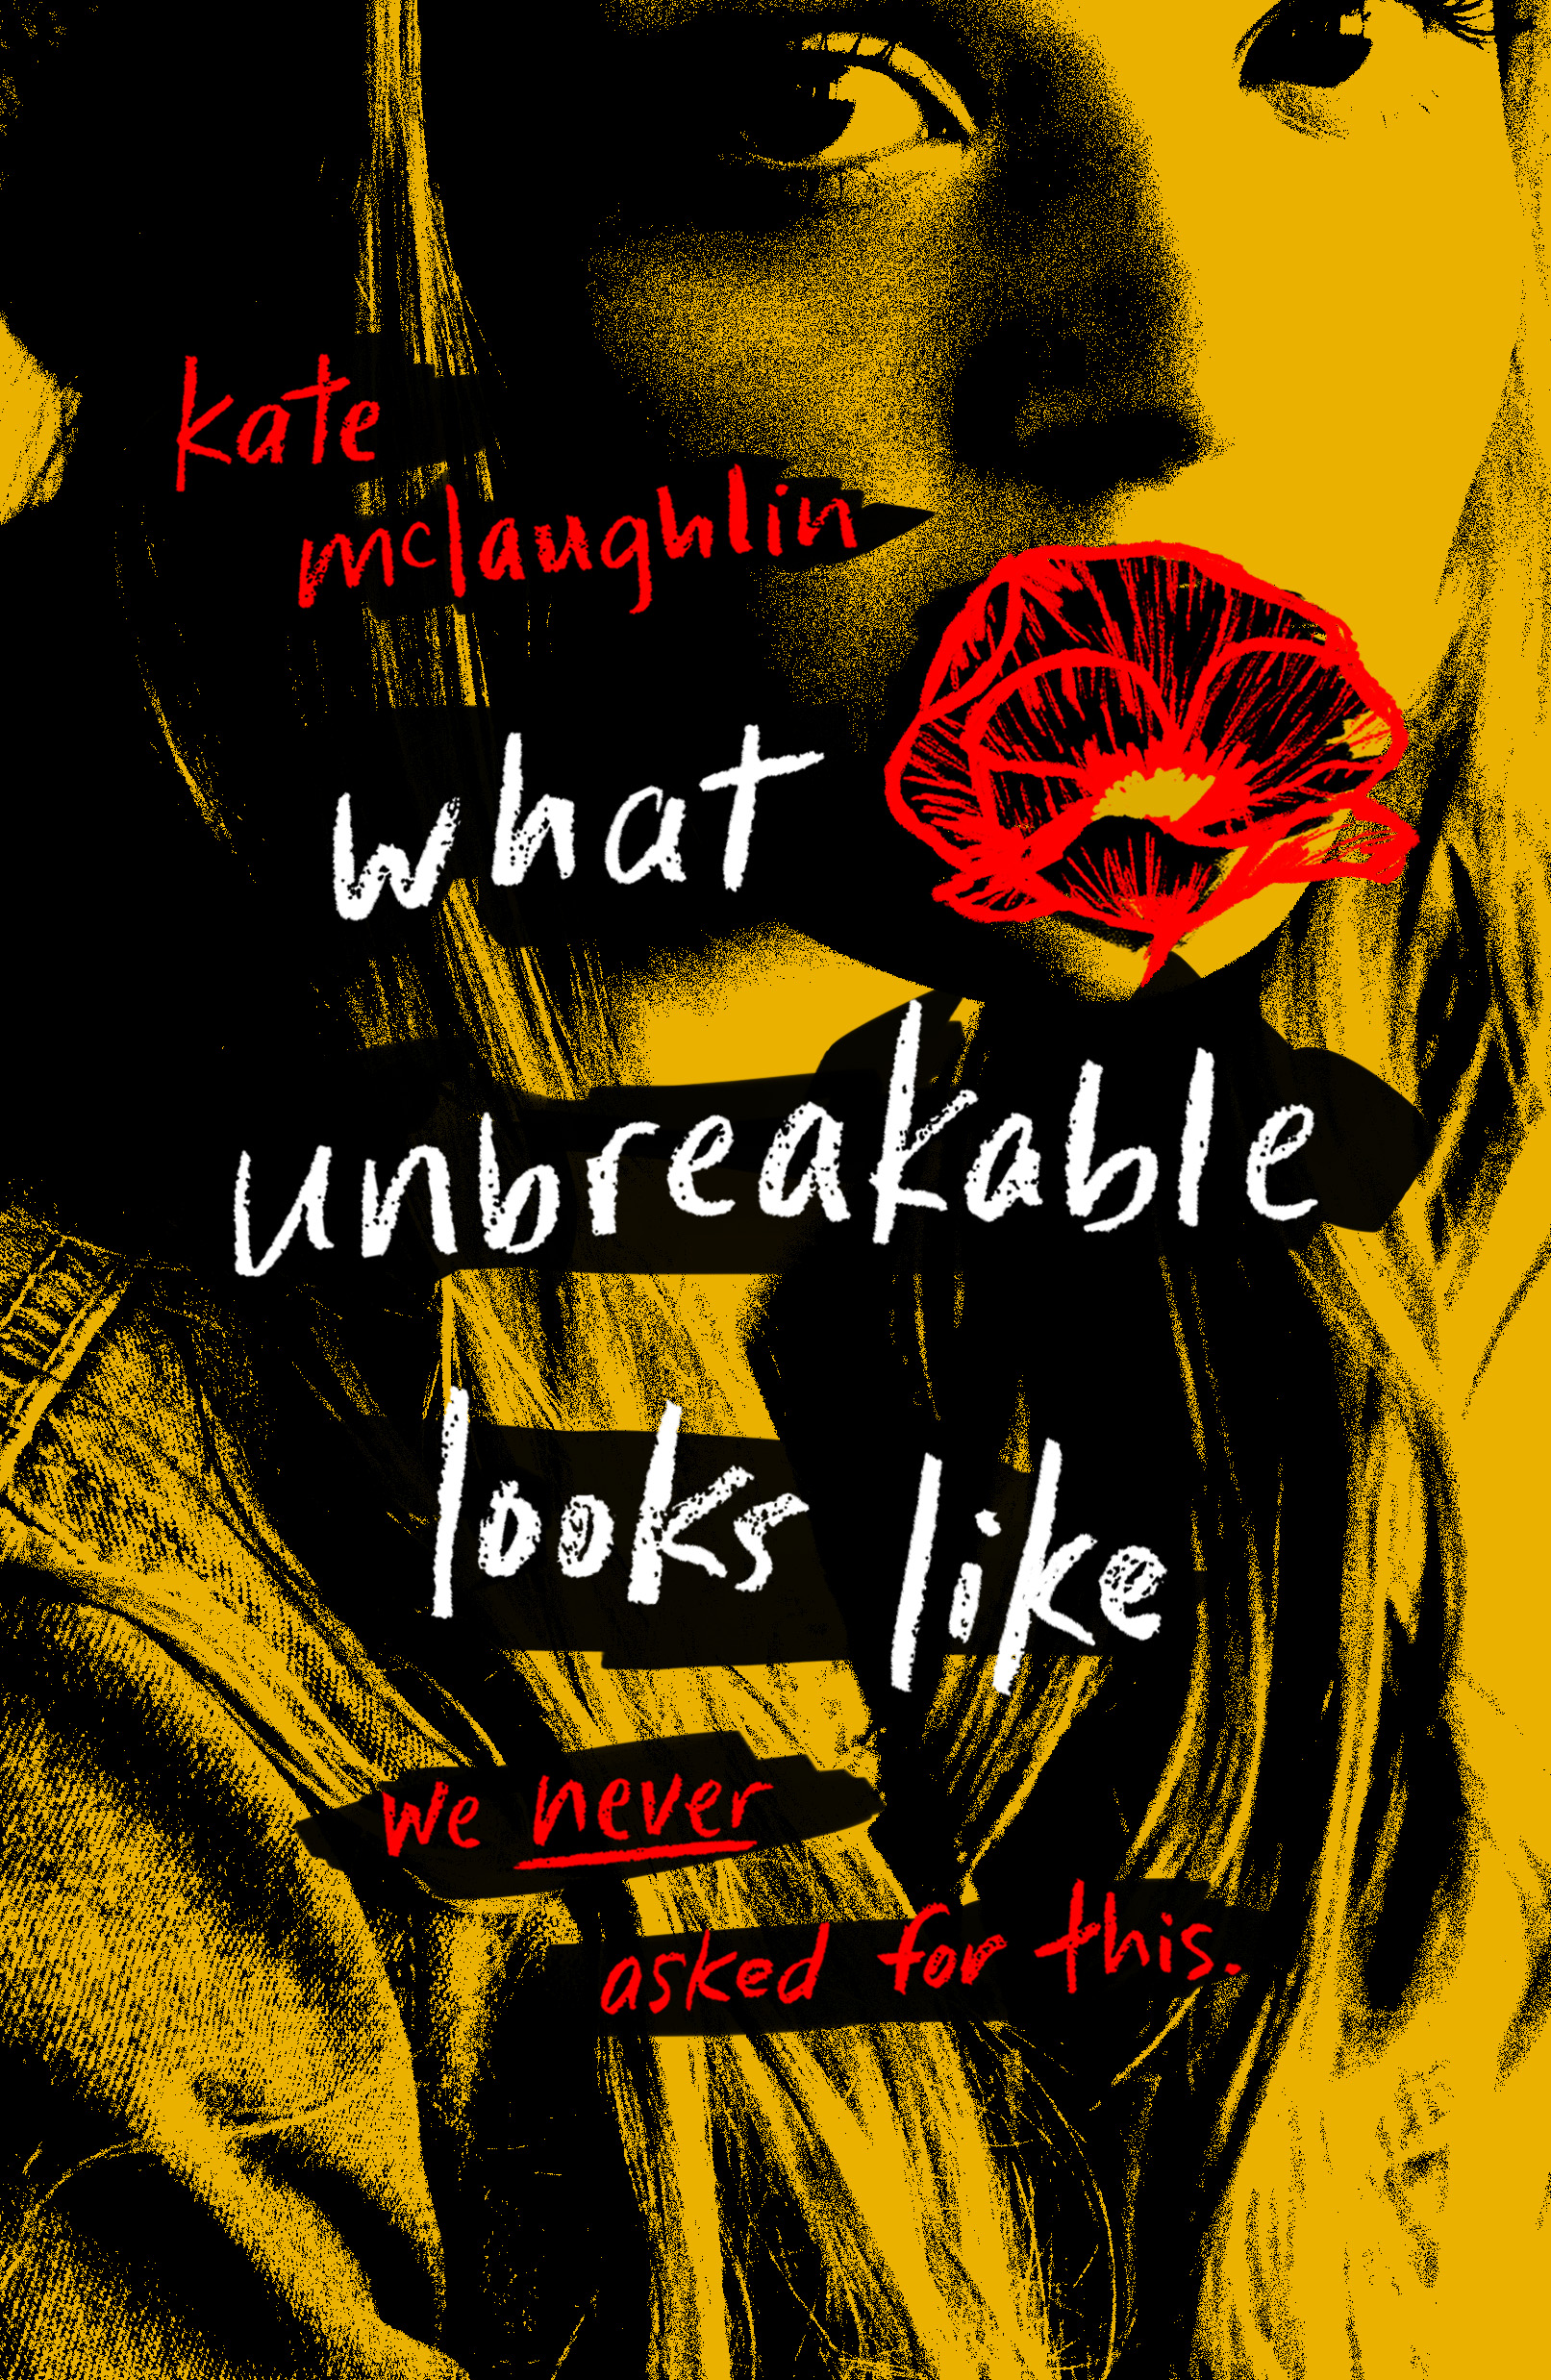 When Does What Unbreakable Looks Like Novel Come Out? 2020 YA Book Release Dates